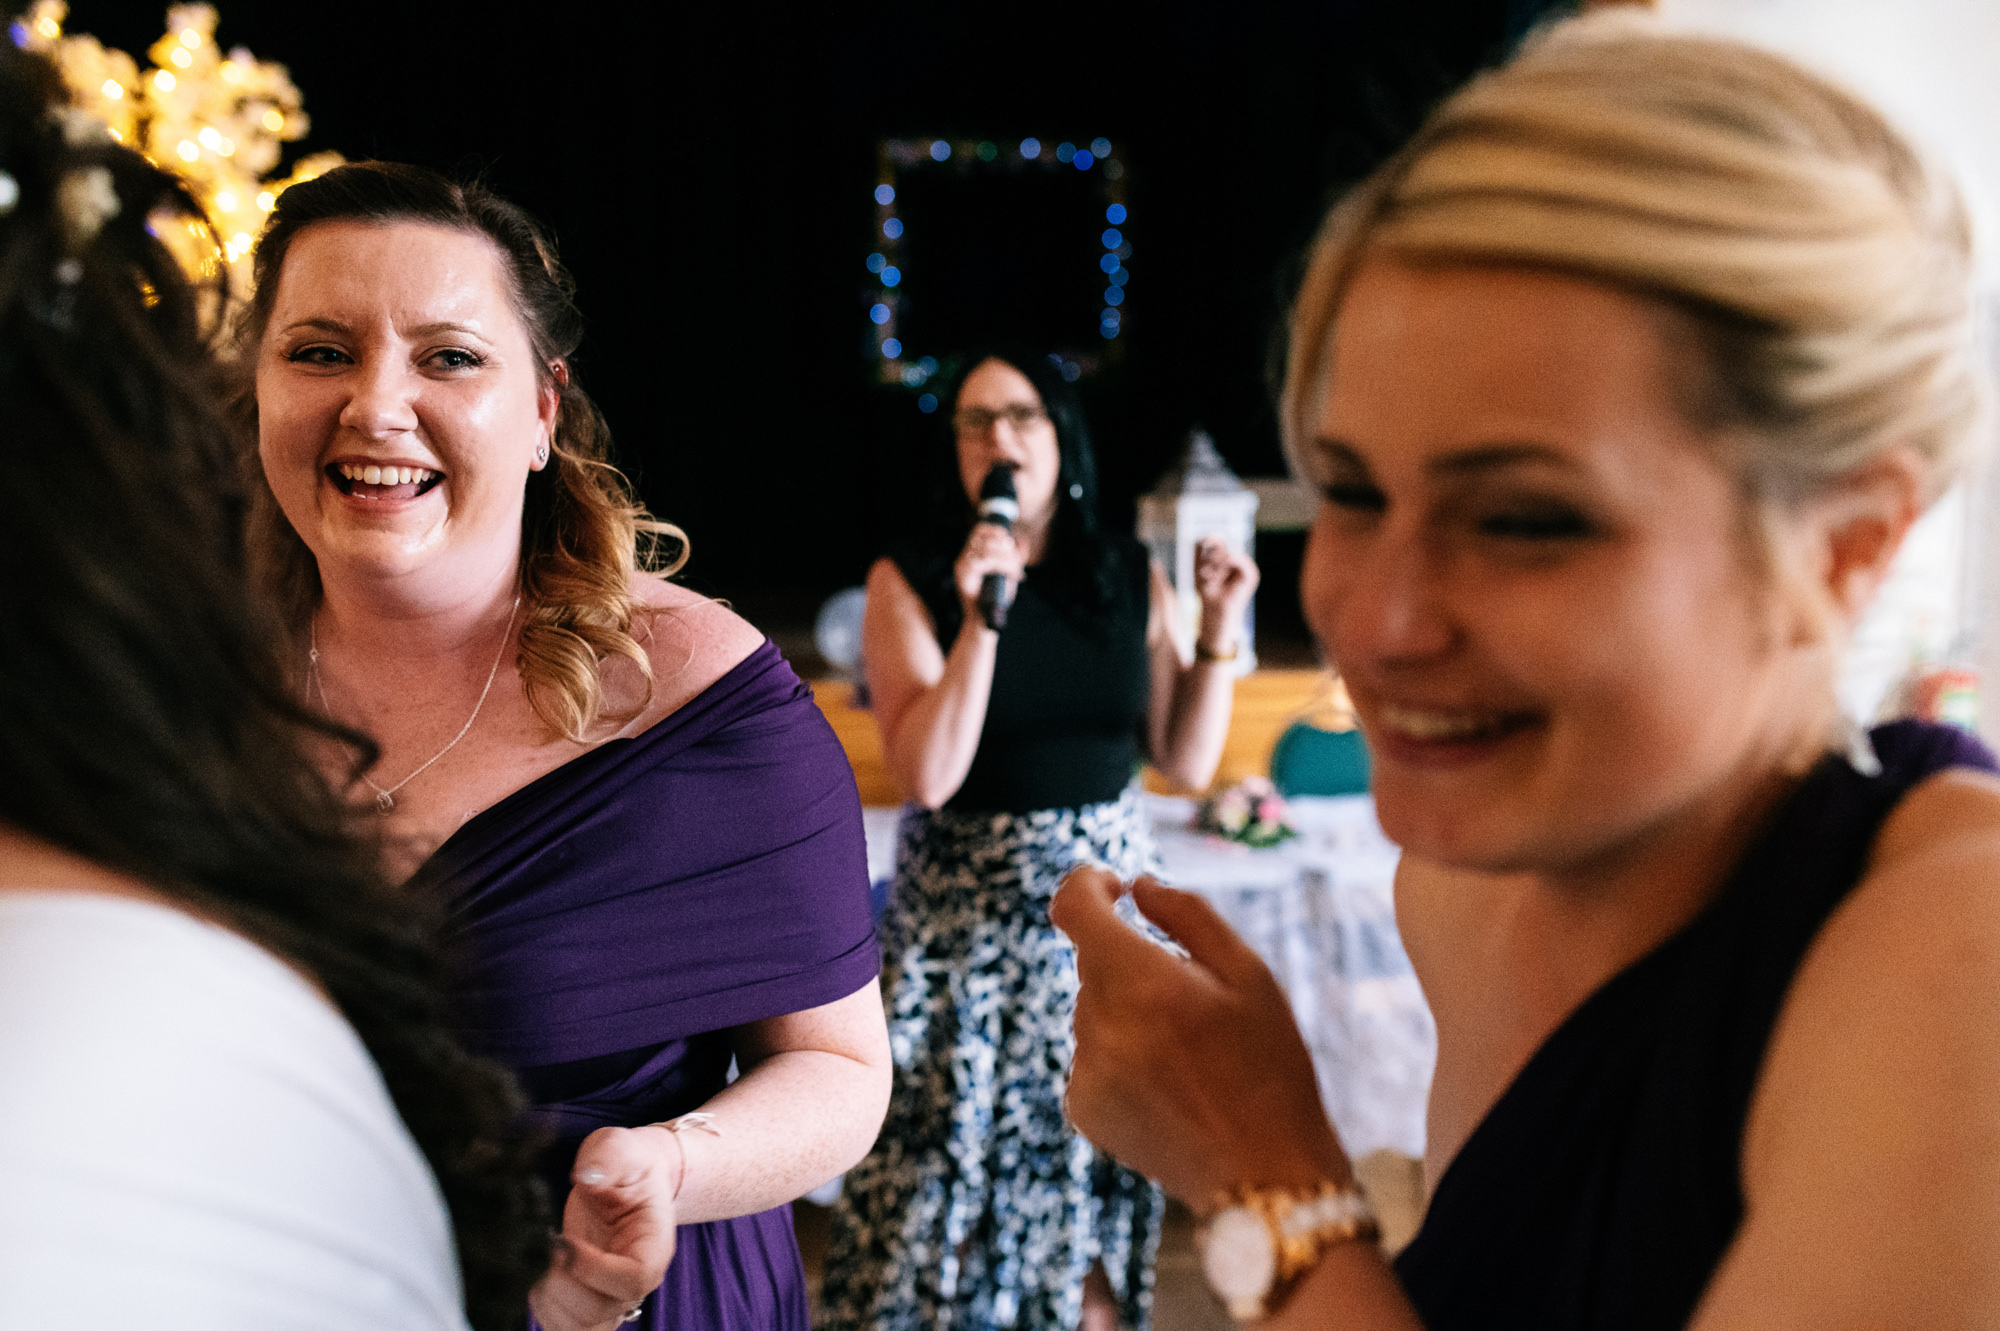 guests laughing while a lady is singing into the microphone